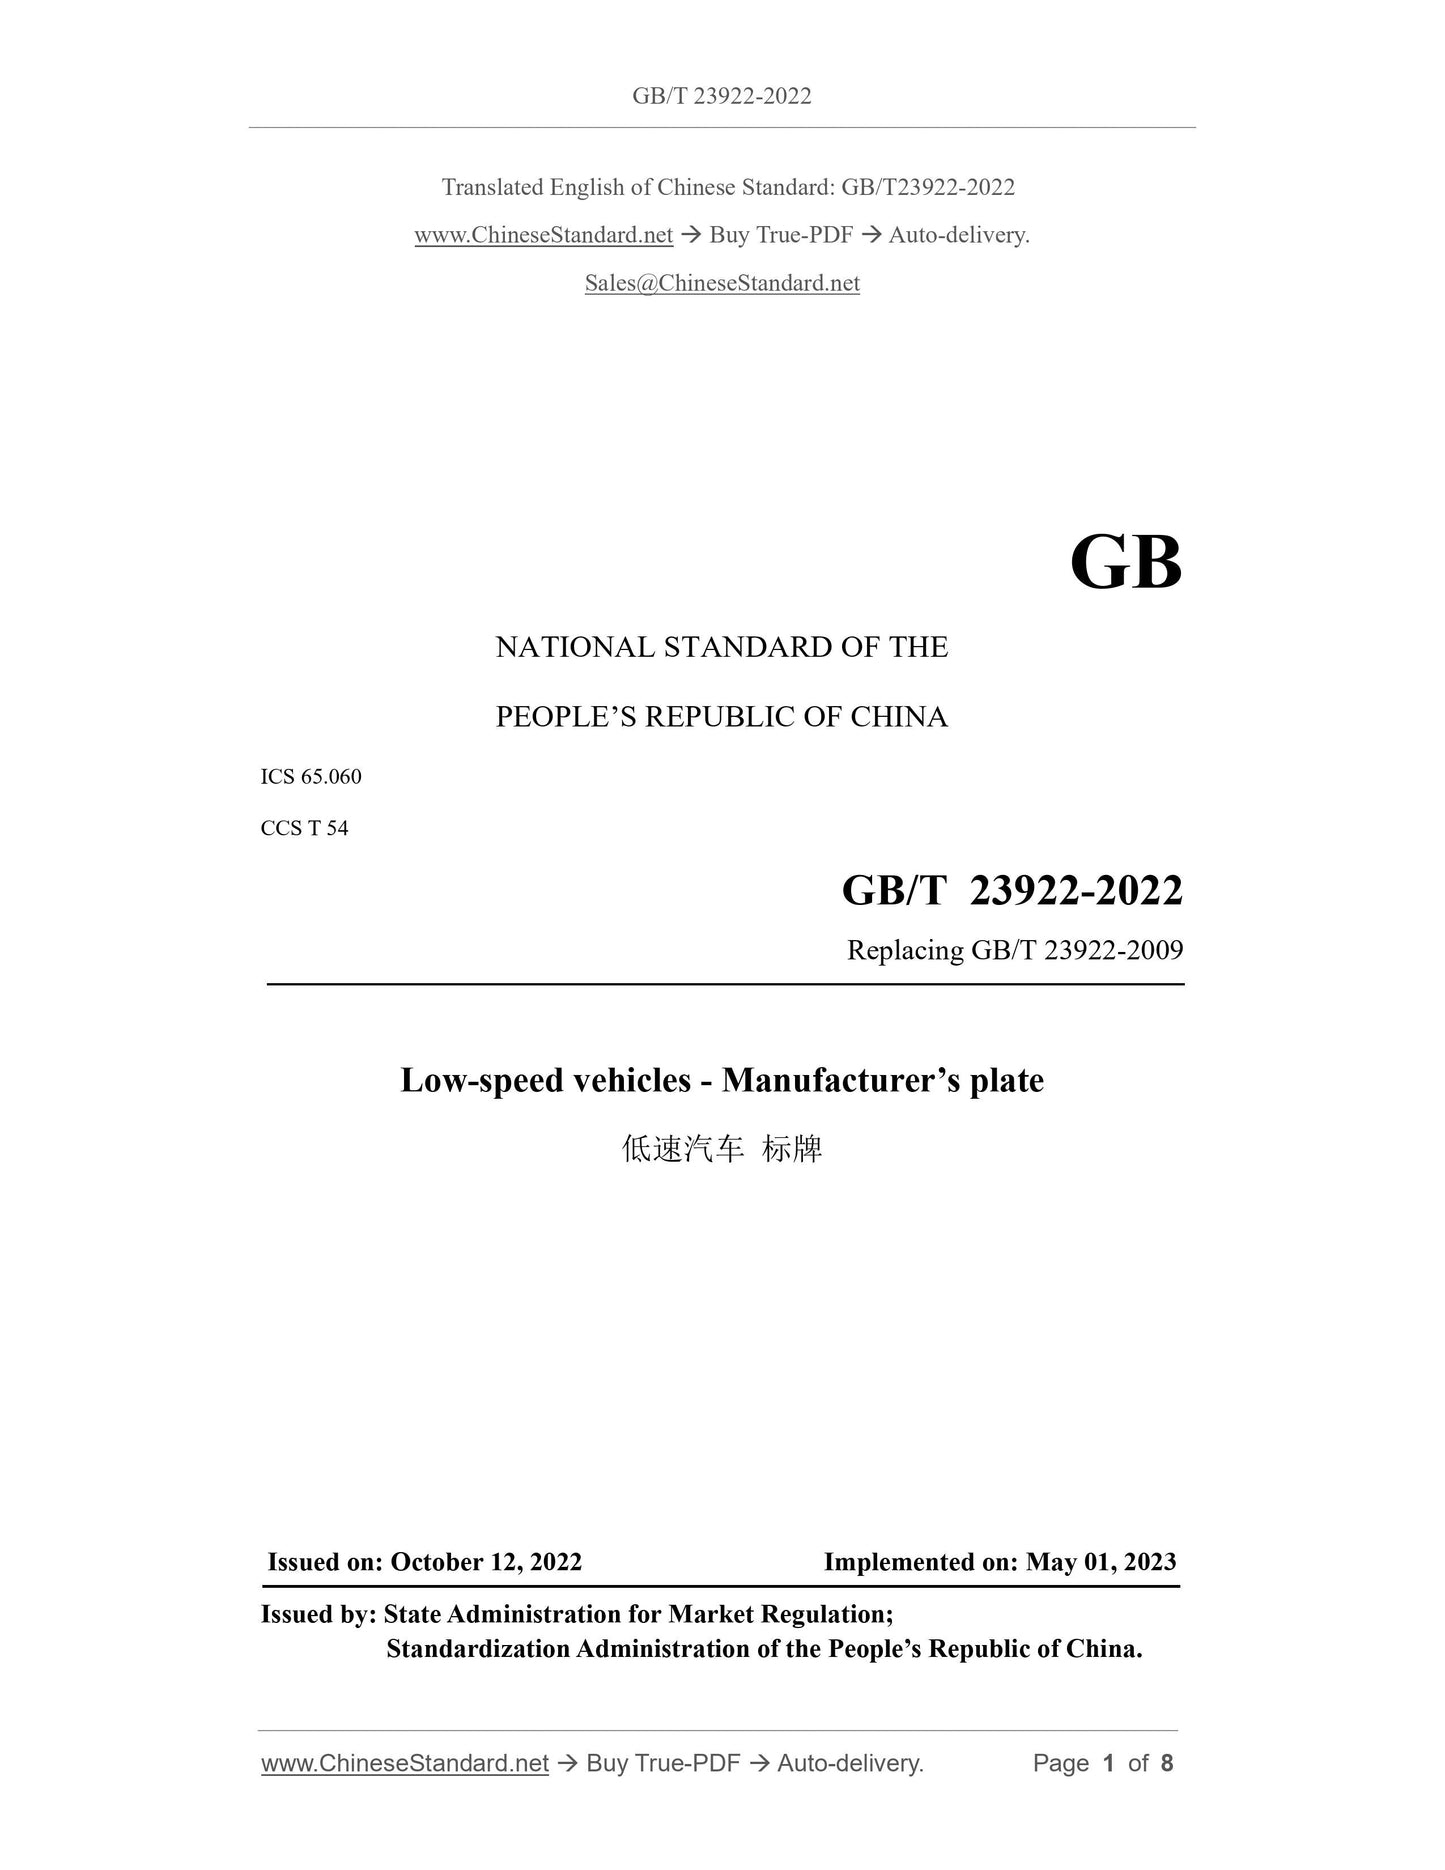 GB/T 23922-2022 Page 1